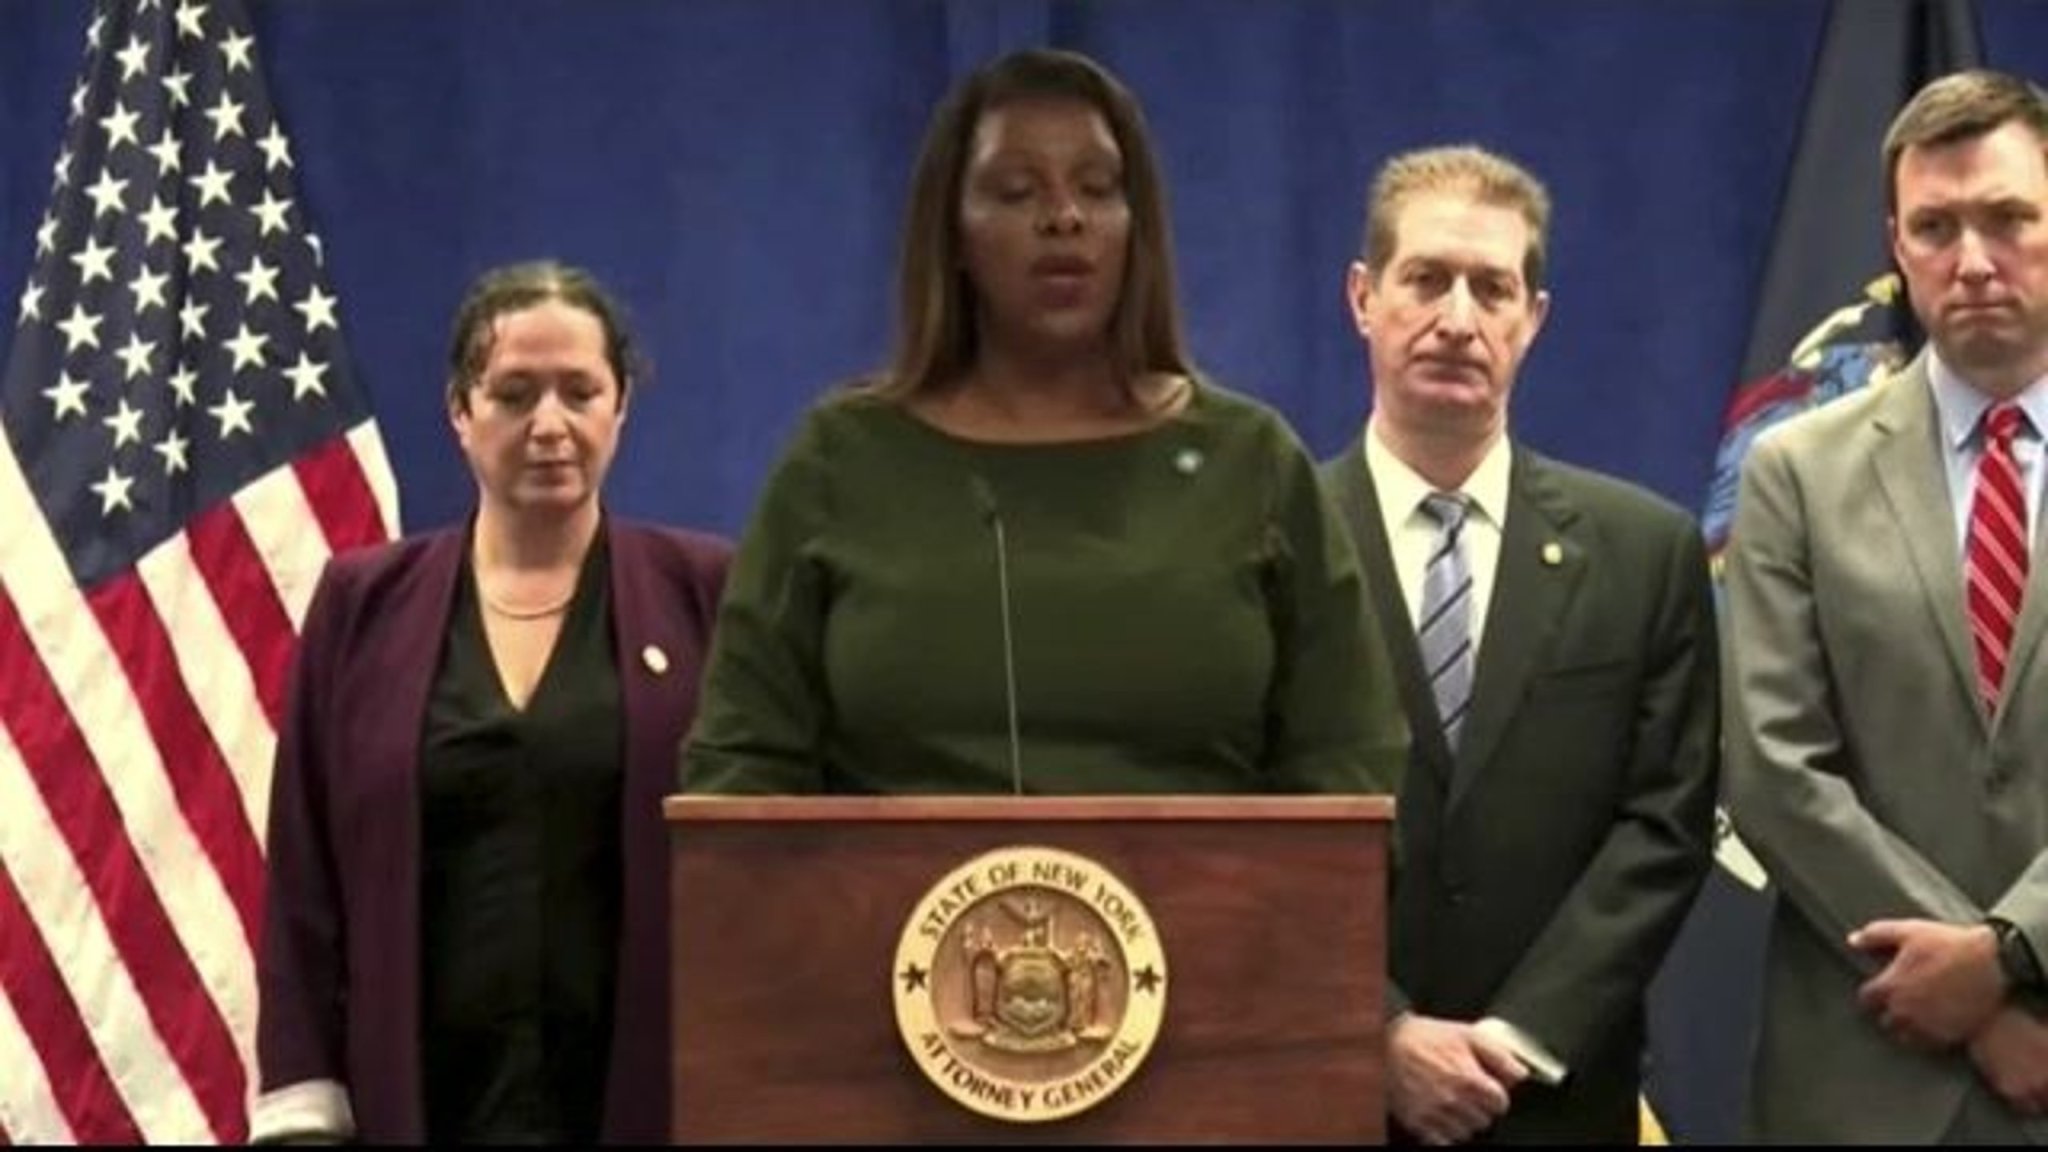 NY AG Letitia James lists off all the crimes the Trump family is accused of committing.